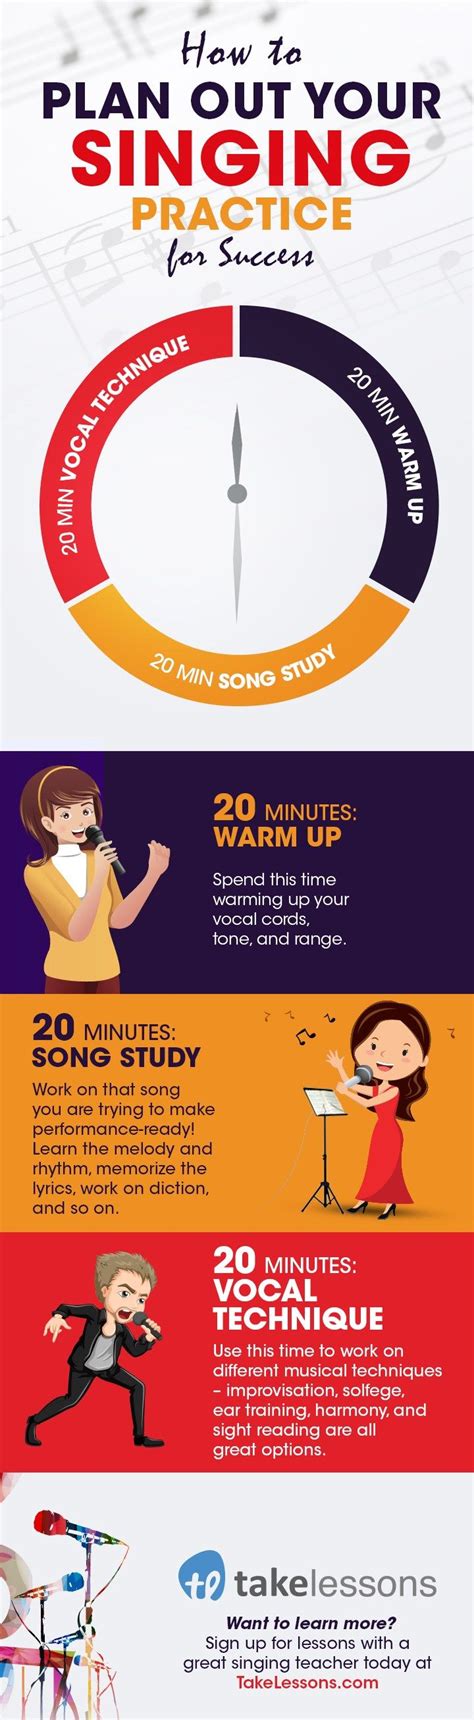 How The Best Singers Structure Their Singing Practice [infographic